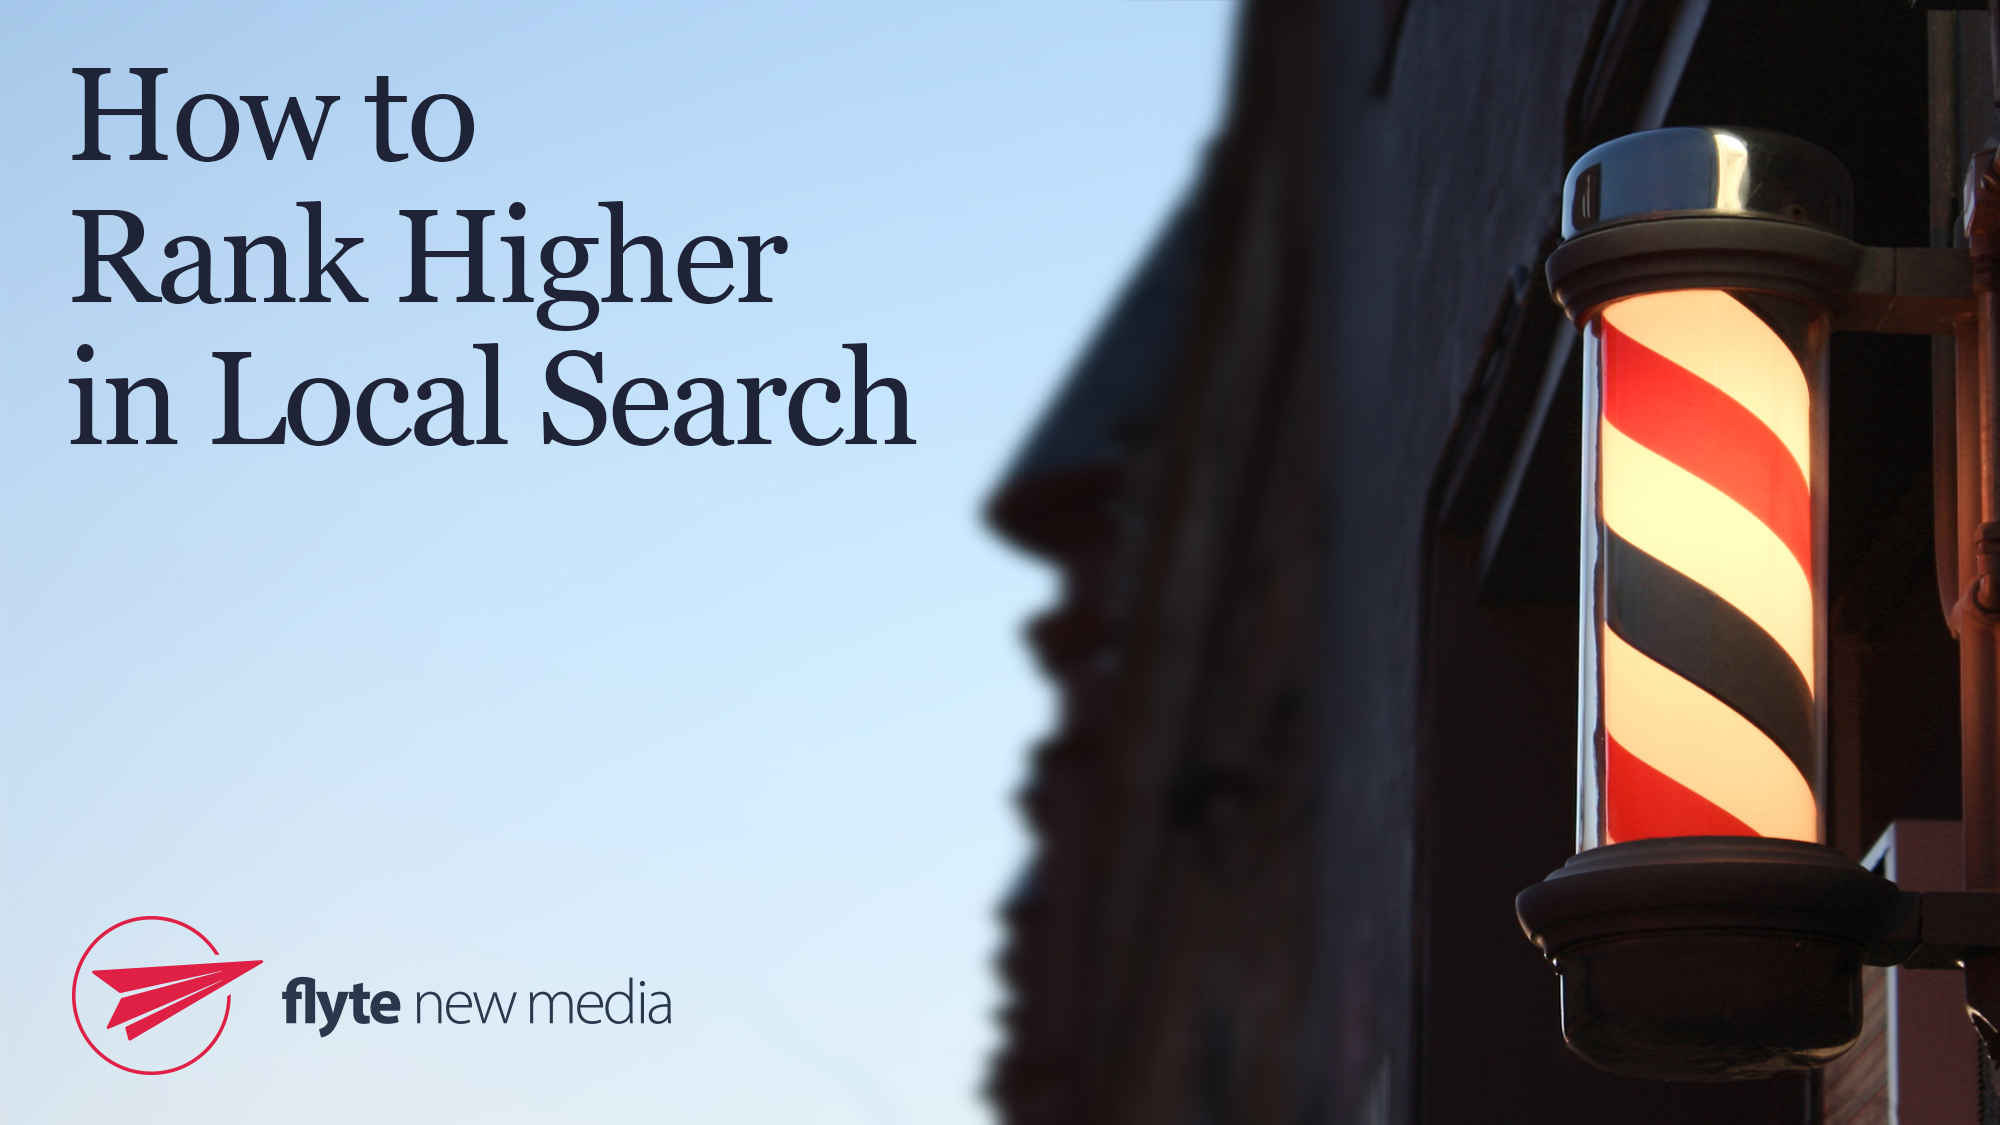 How to Rank Higher in Local Search